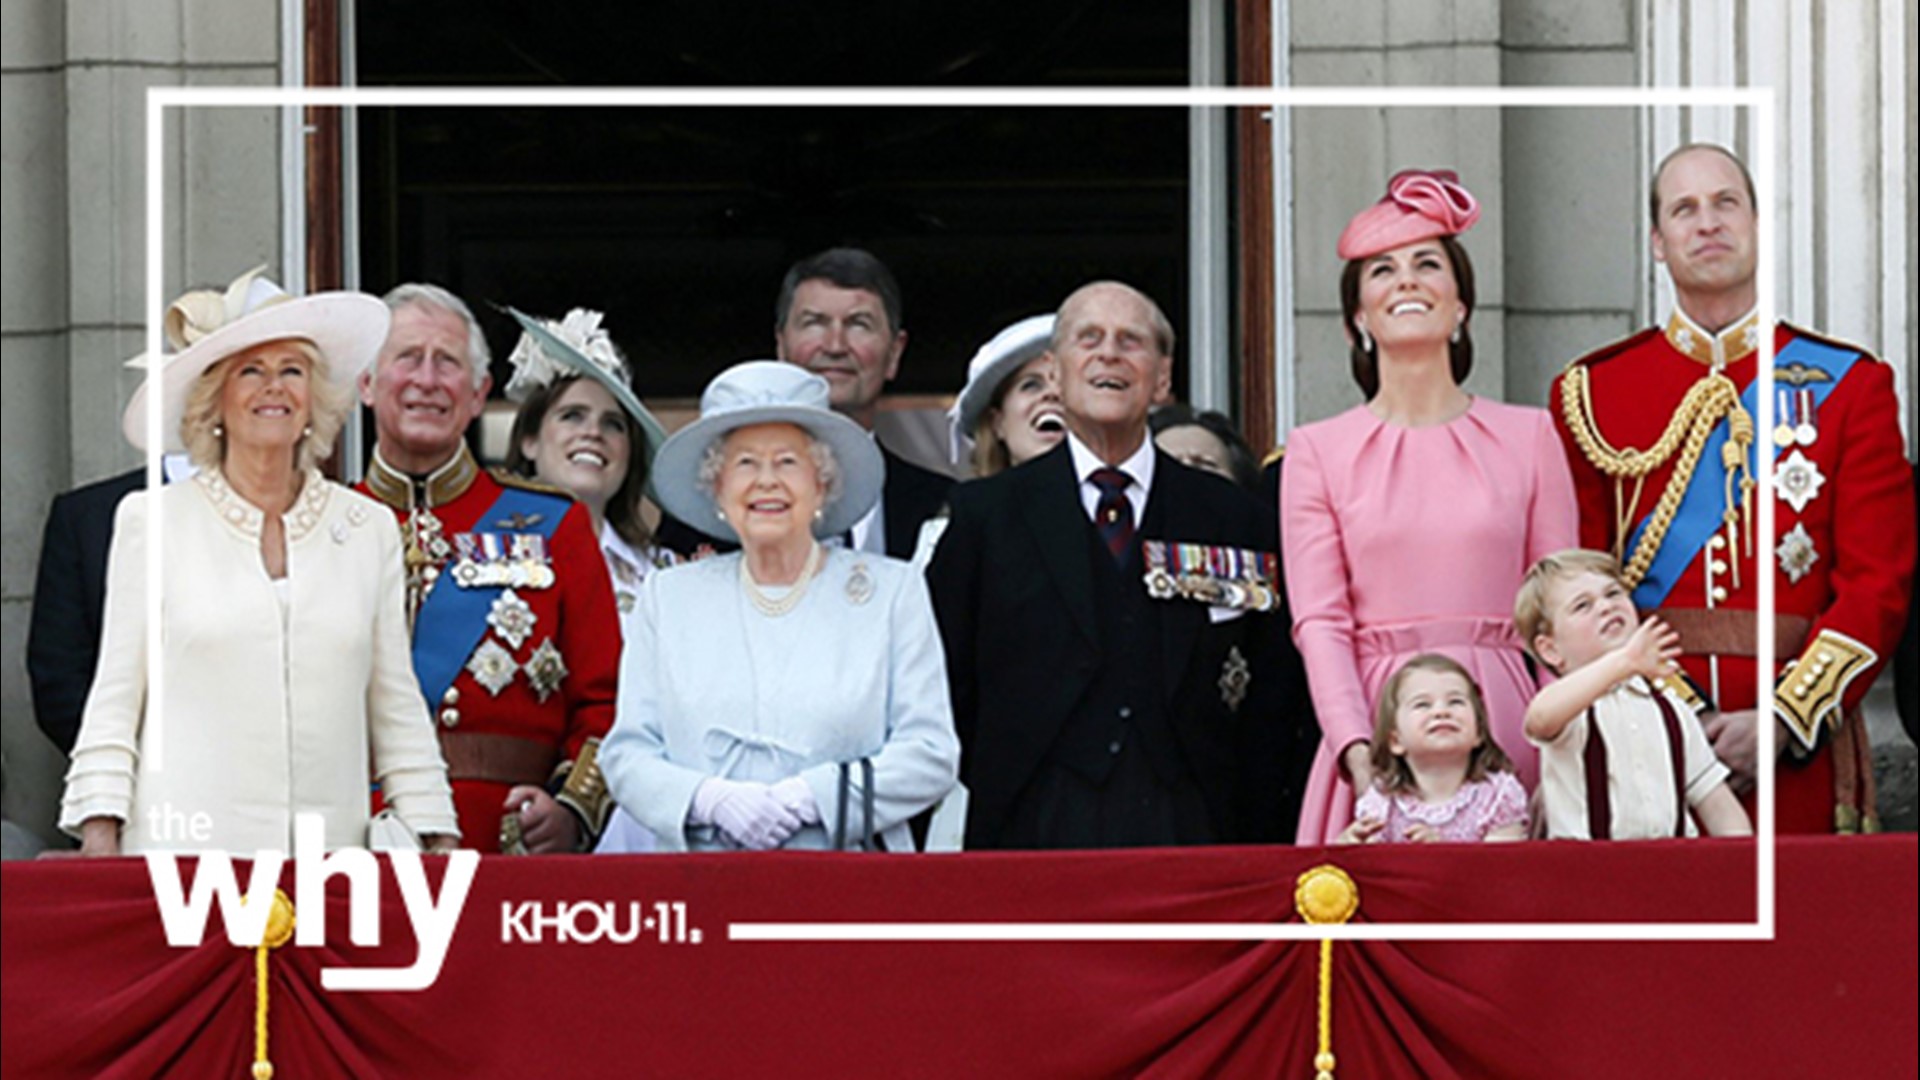 While Britons have mixed feelings on the monarchy, many Americans embrace the pageantry.